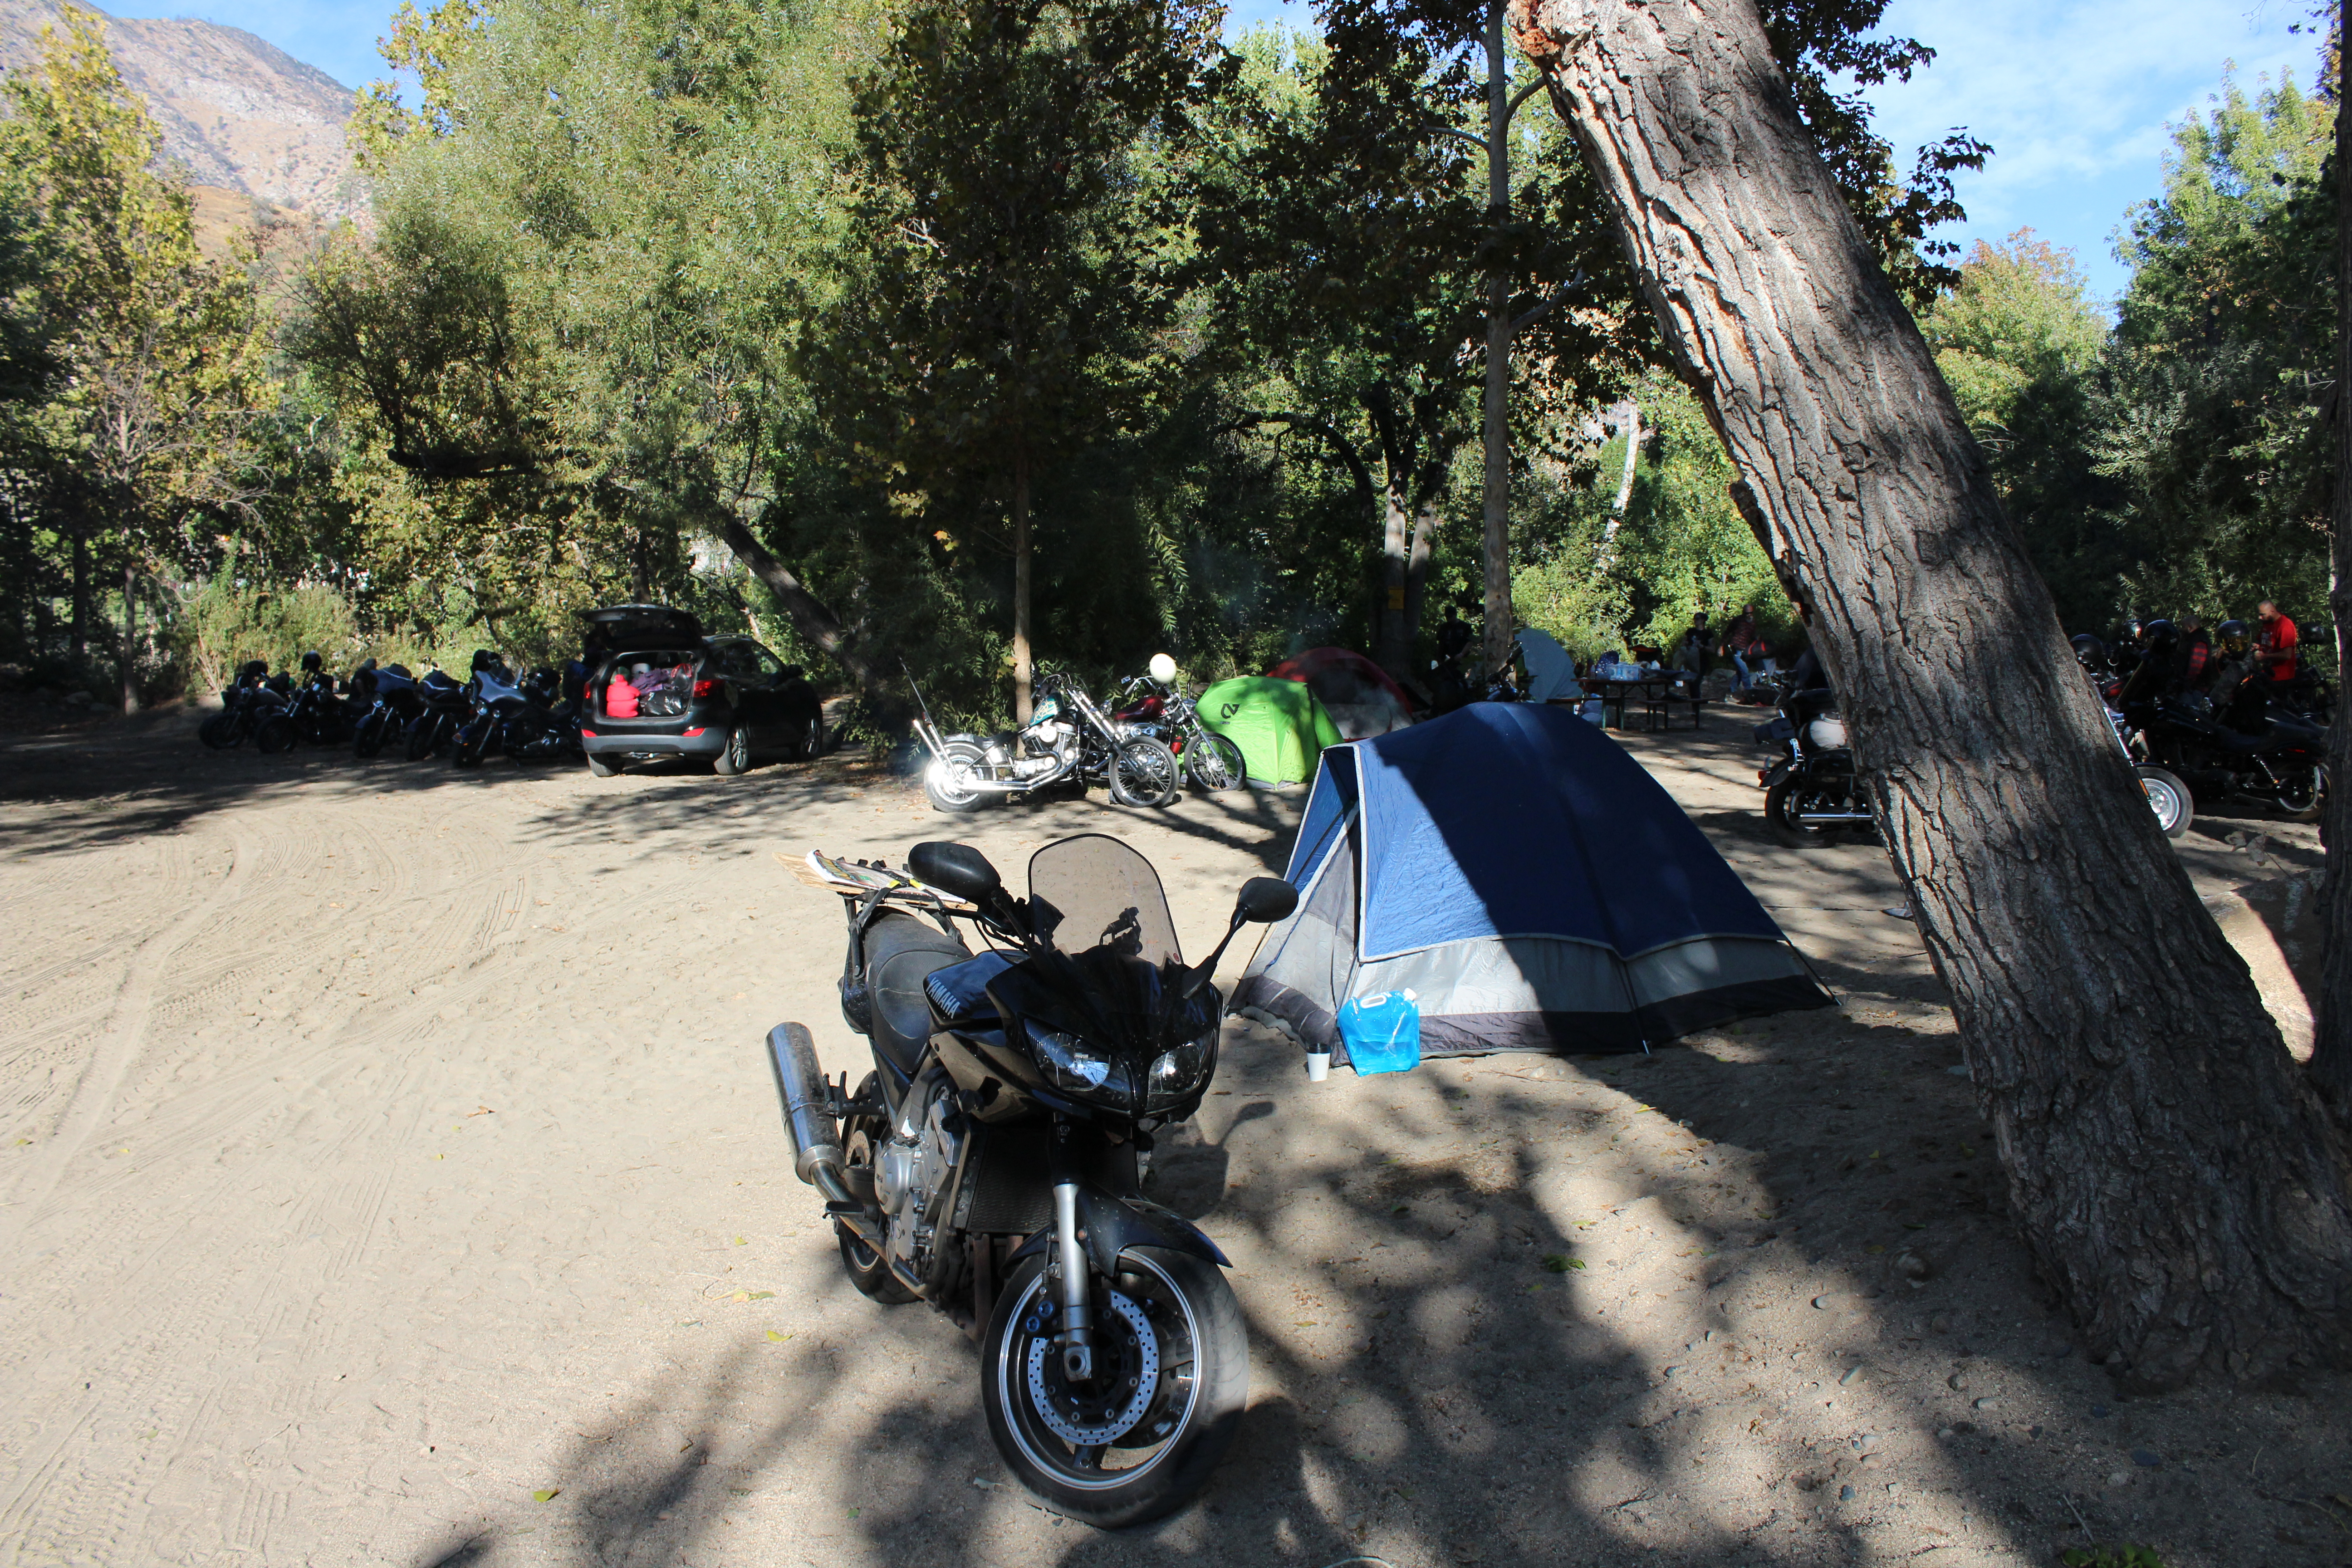 A motorcycle next to a tent in a campground by a river